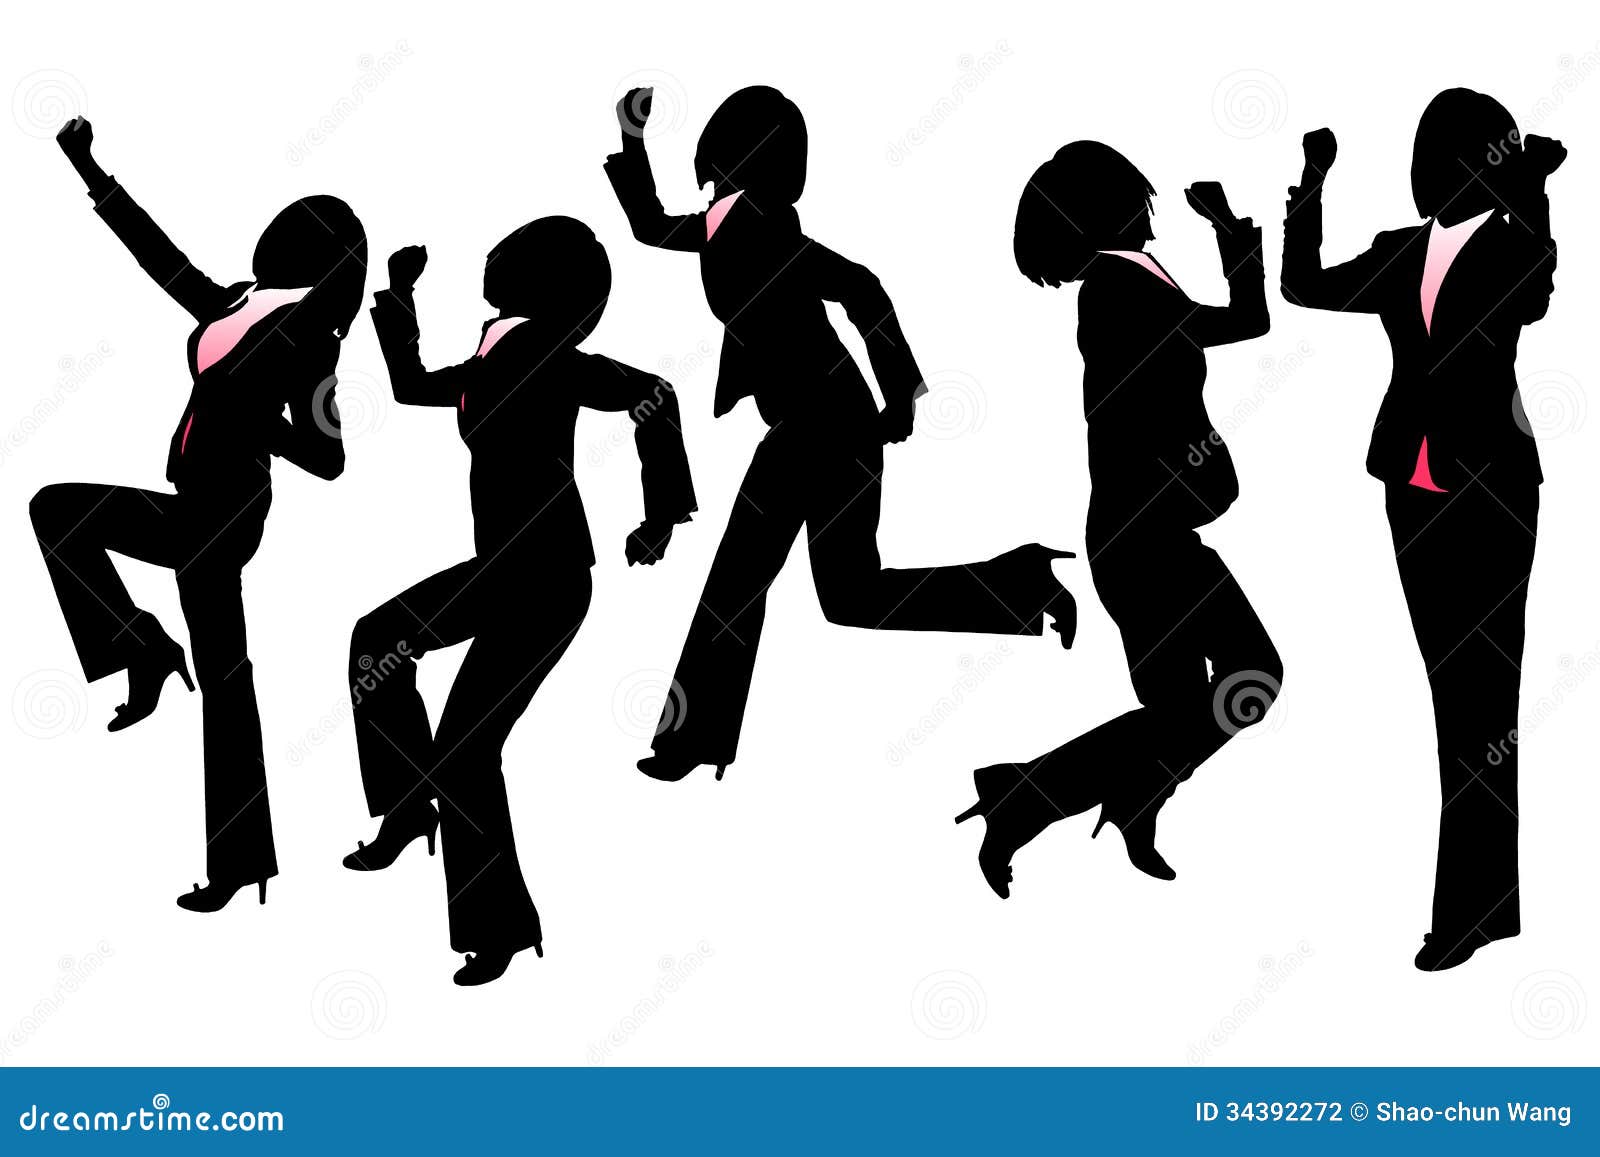 silhouettes-happy-excited-business-woman-white-background-34392272.jpg